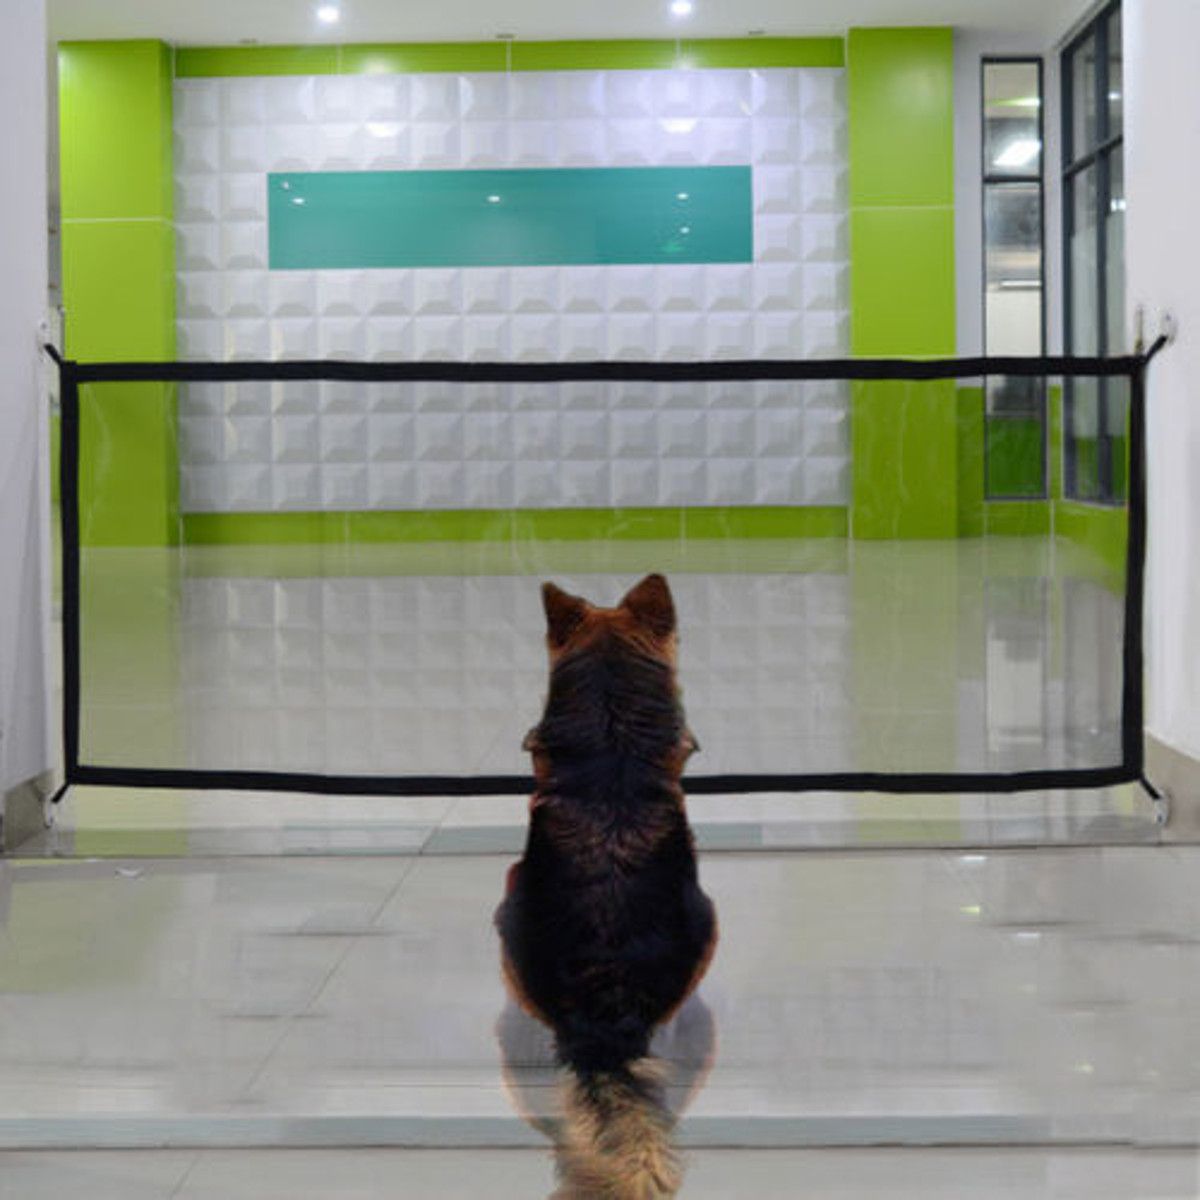 74x182cm-Portable-Car-Magical-Safety-Gate-Guard-Fence-Isolation-Network-for-Pet-Dog-Puppy-Cat-1322400